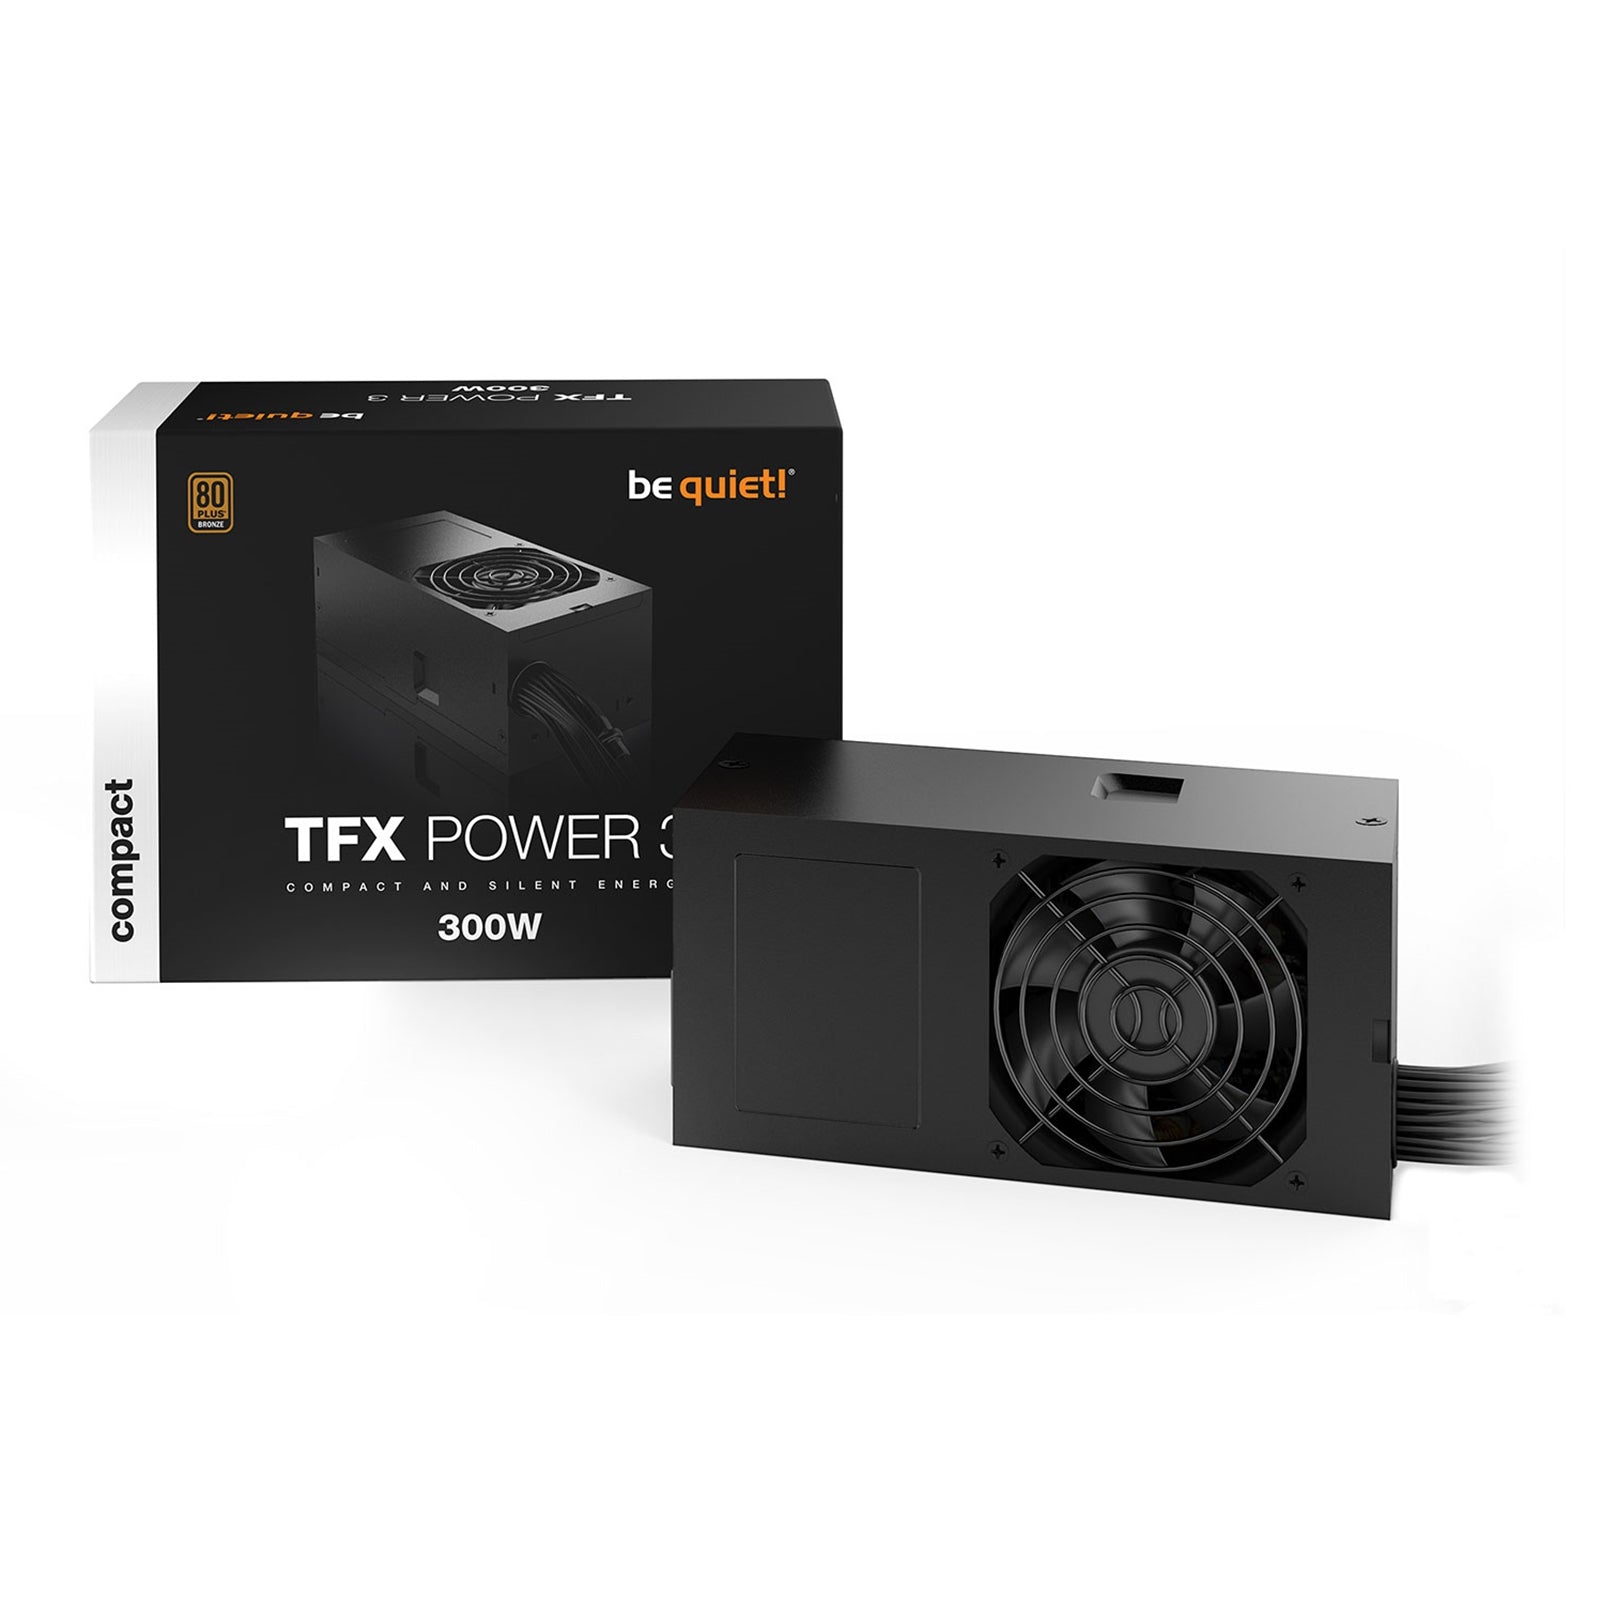 Be Quiet! TFX Power 3 300W PSU Compact, Efficient, and Quiet Power Supply with 80+ Bronze Certification